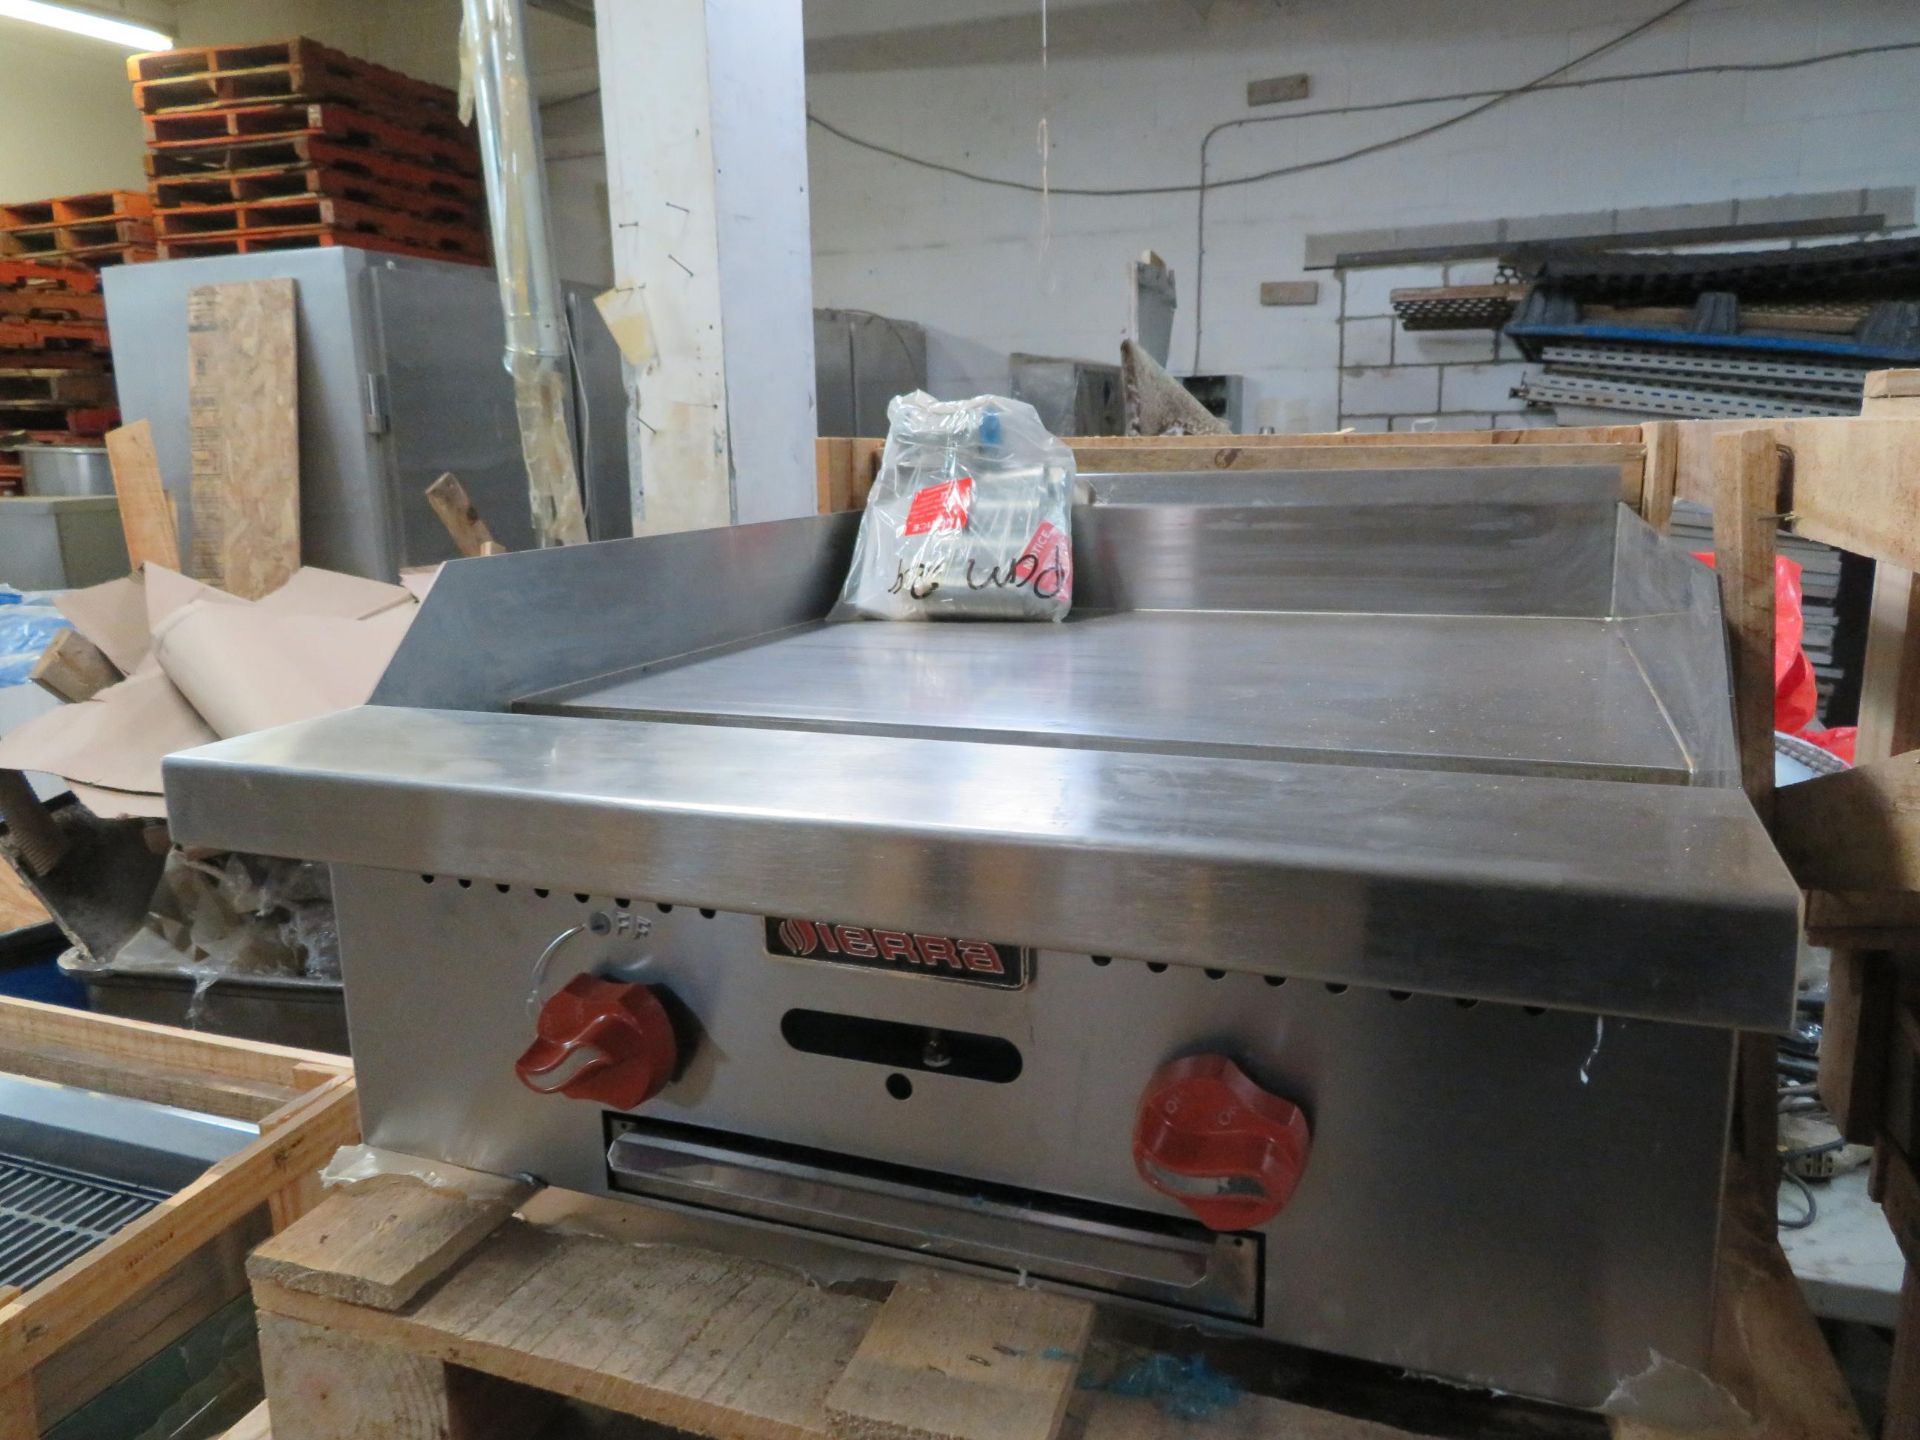 Brand New SIERRA 24" hot plate/griddle Mod #SRMG-24 (natural gas) approx. 24"w x 31"d x 12"h - Image 2 of 2